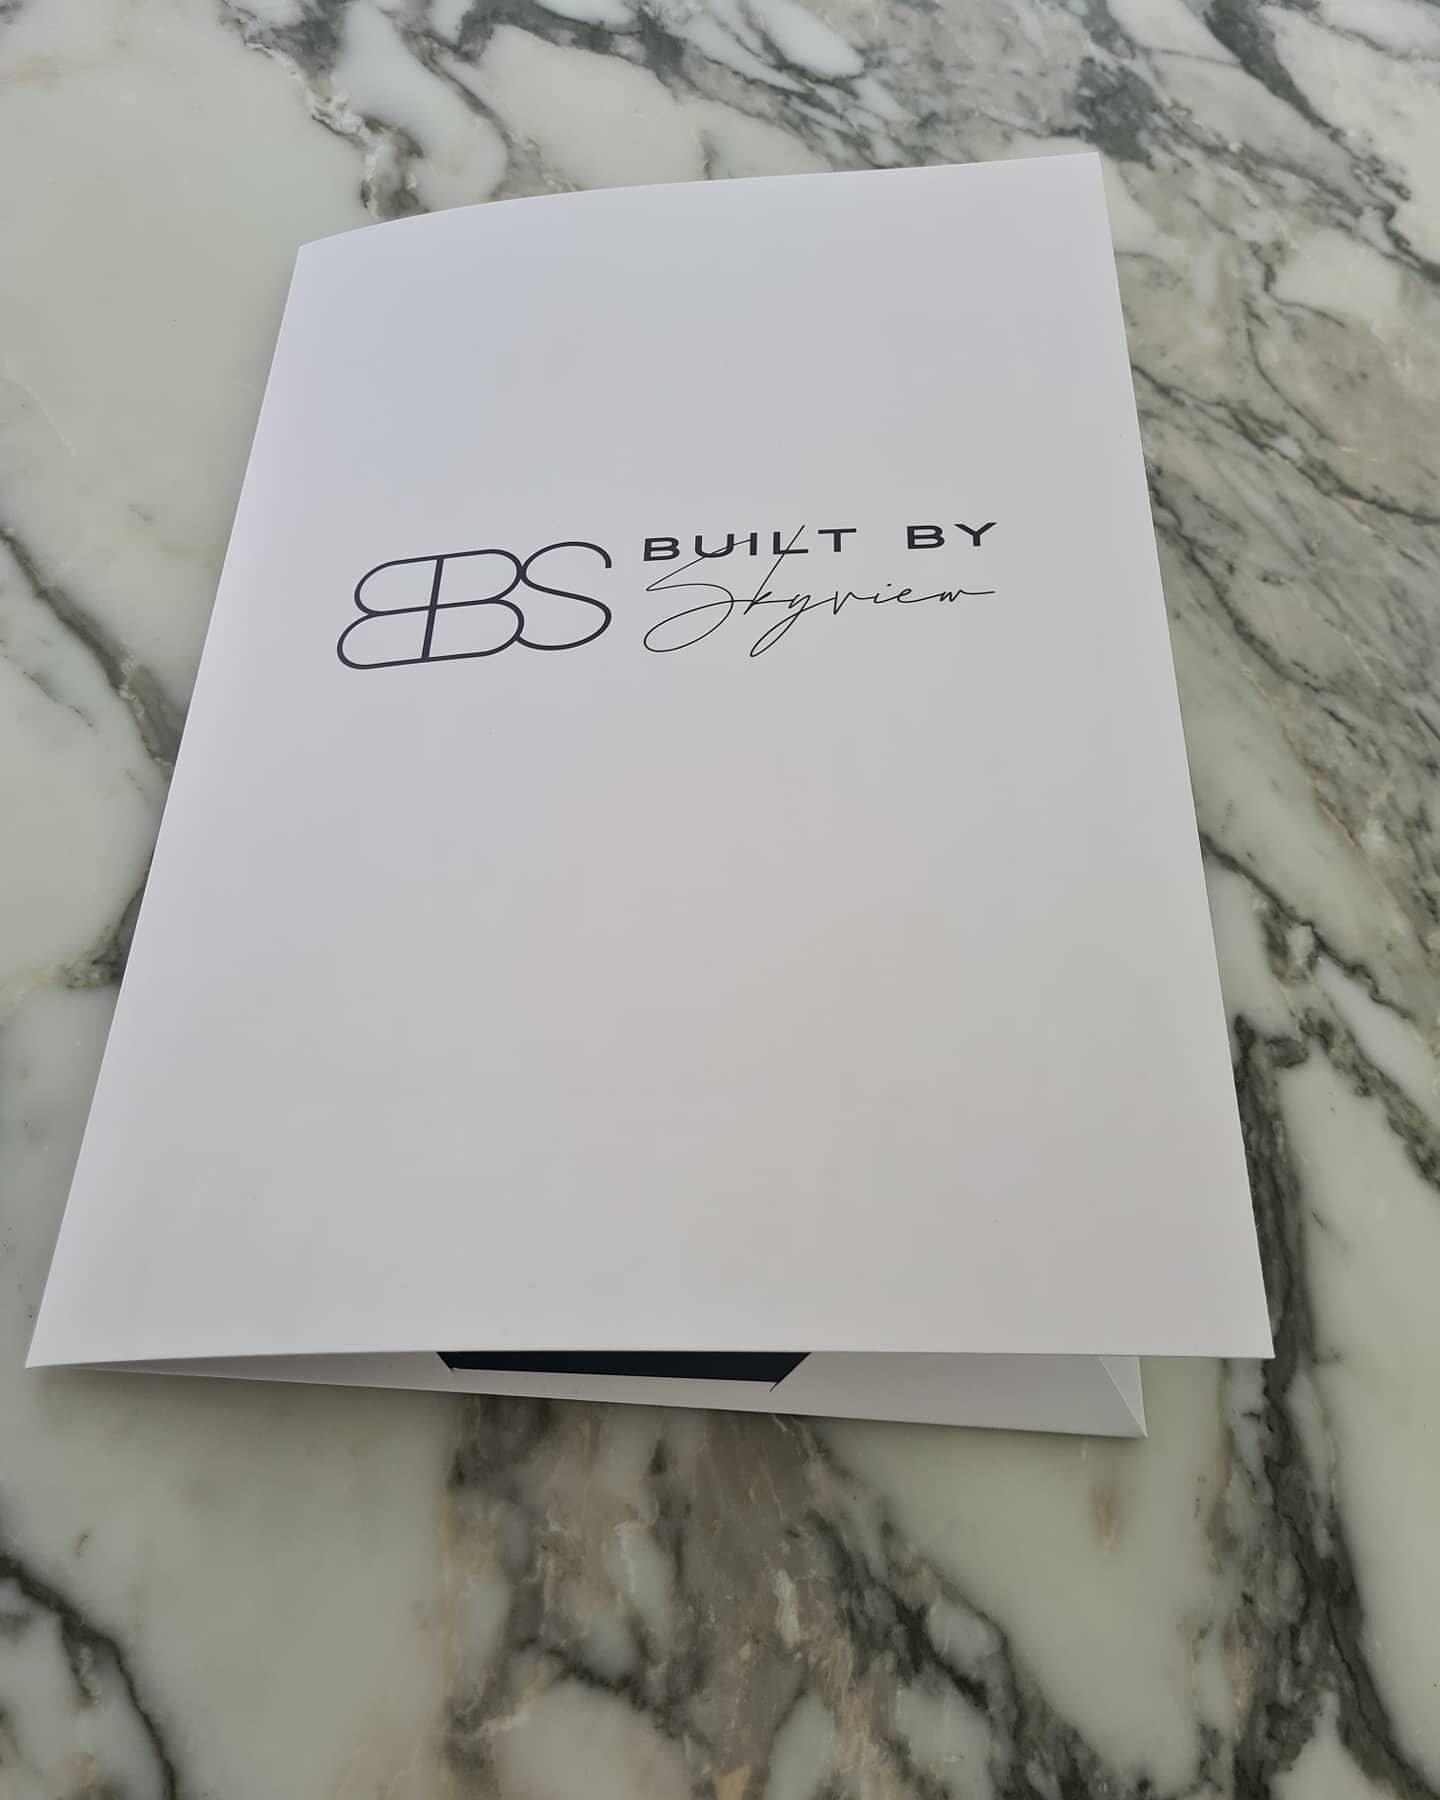 New BBS folder ready for all of our wonderful clients.
#bbs #builtbyskyview #modernhome #designerhome #builder 
www.builtbyskyview.com.au 
1300 451 368